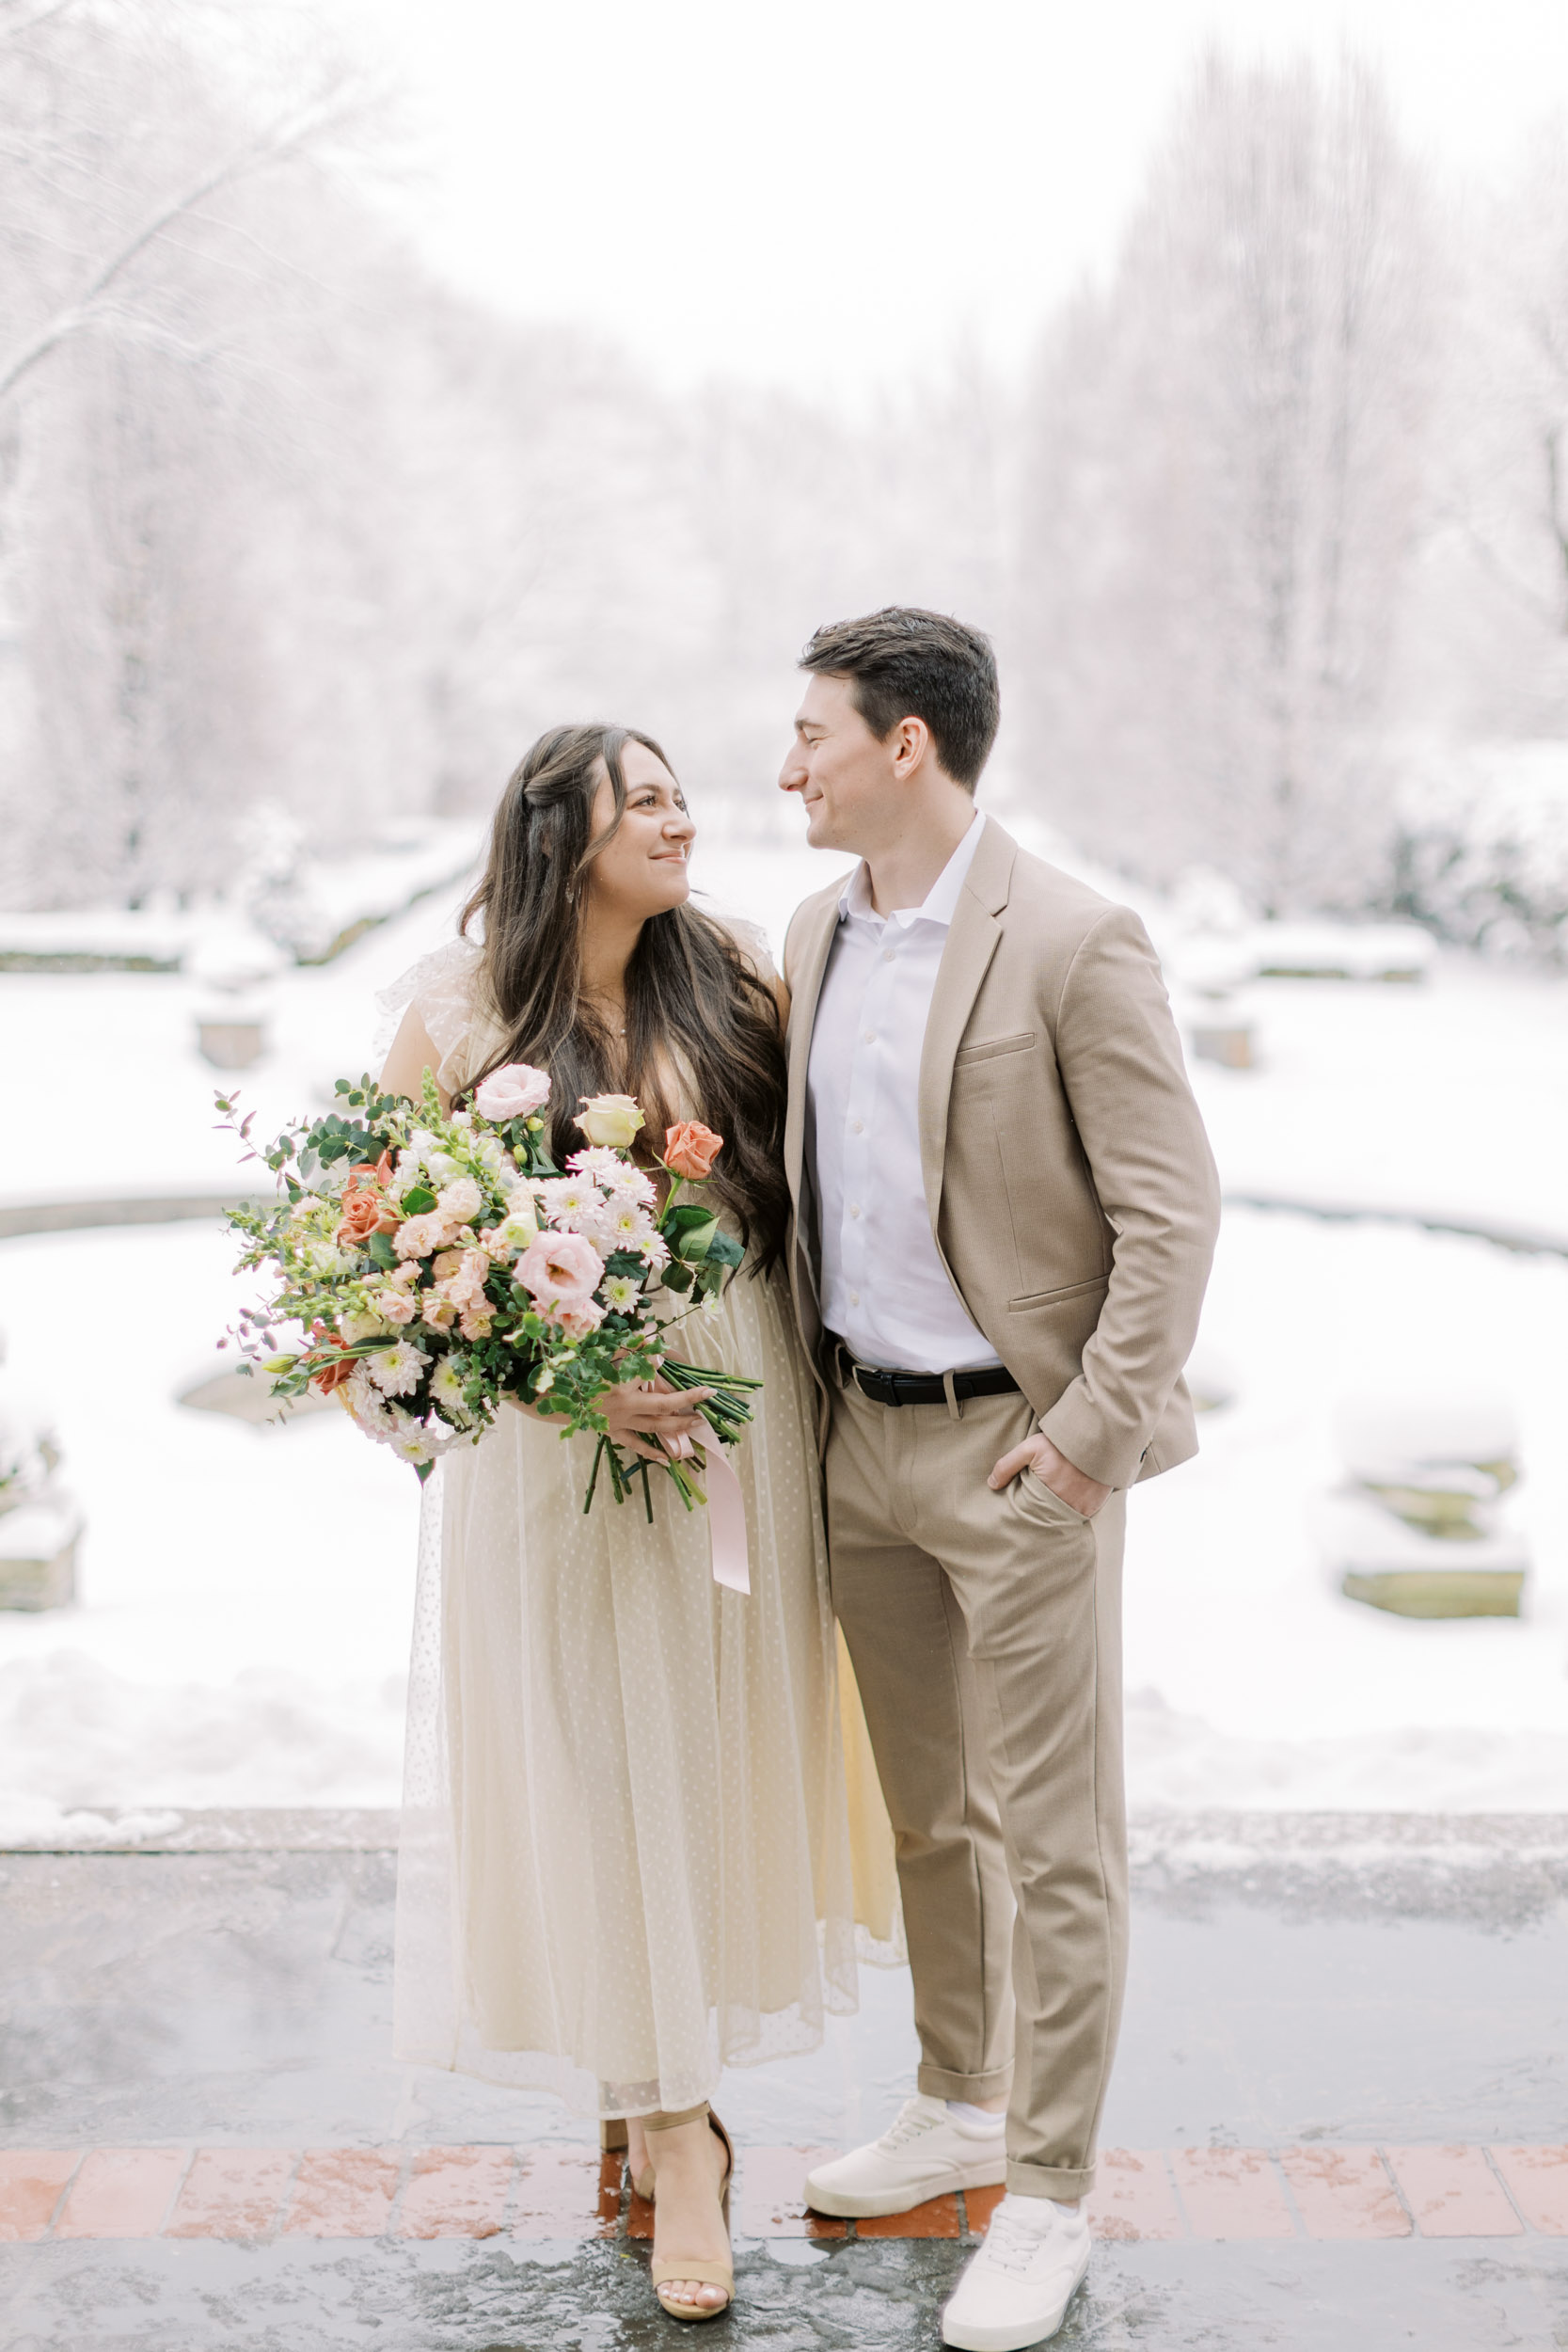 Bride and groom smiling at each other in snowy backyard at Graydon hall